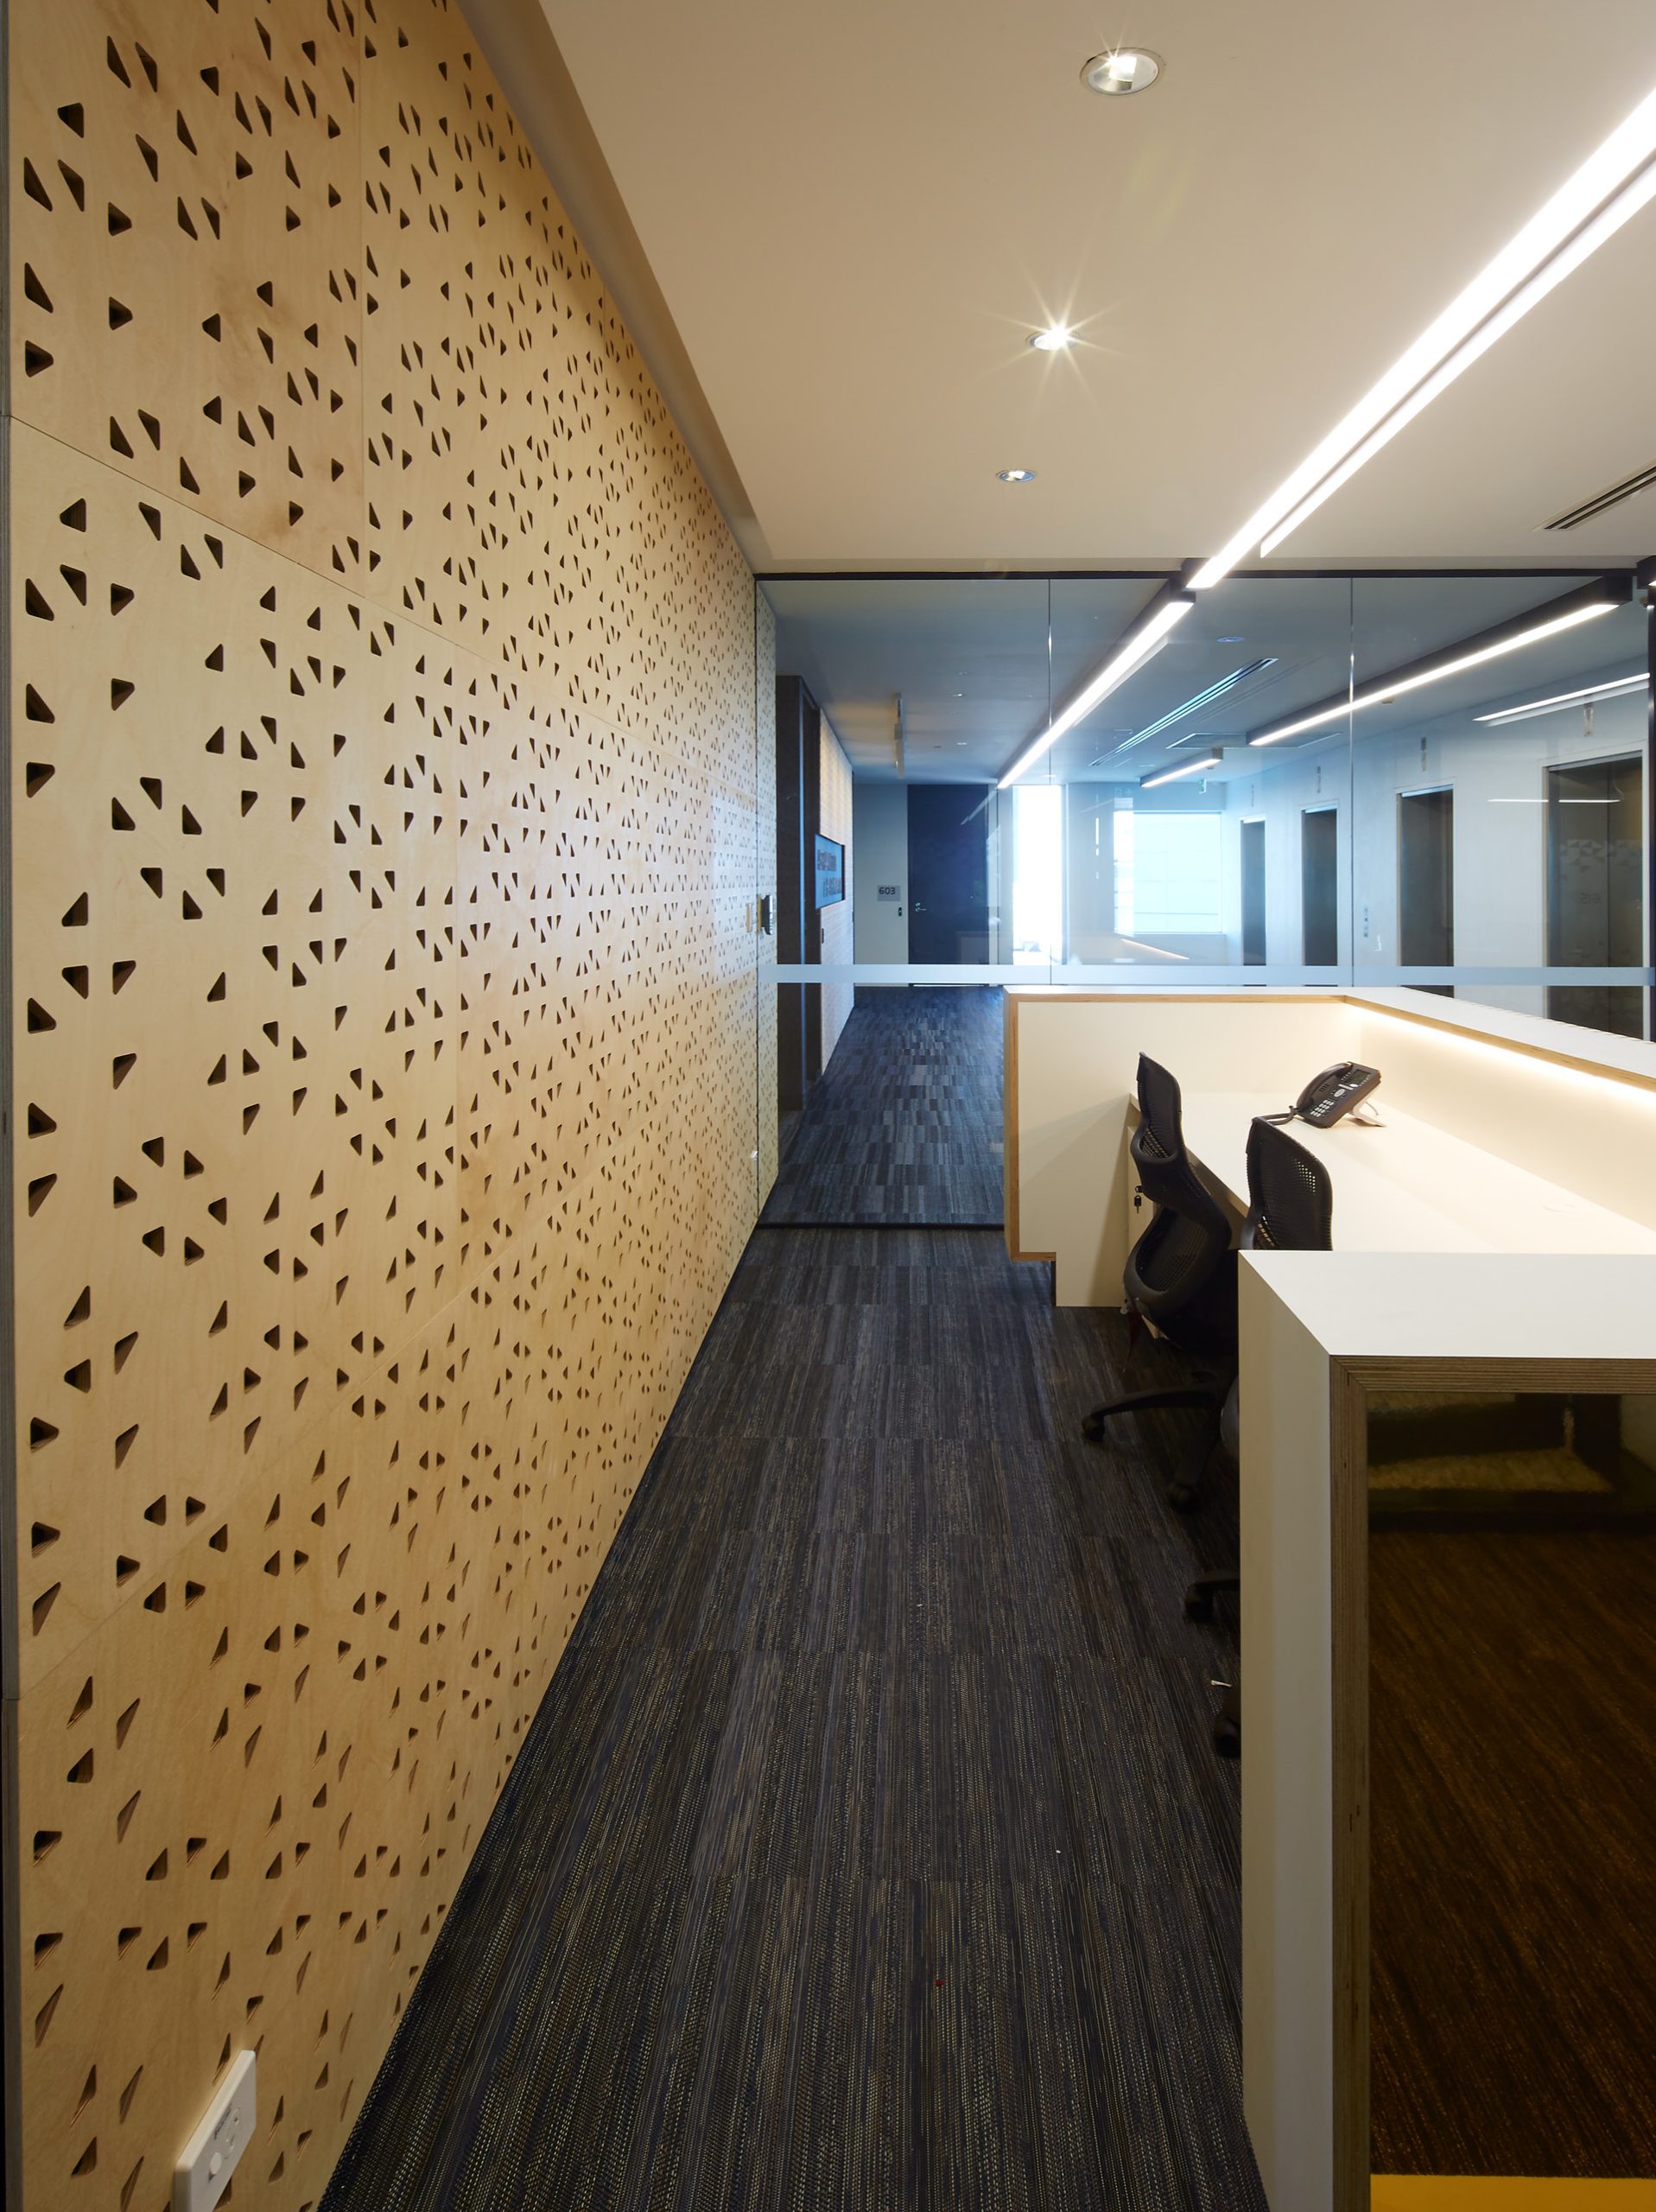 5 reception and feature wall australian institute of health innovation taylor construction education fitout